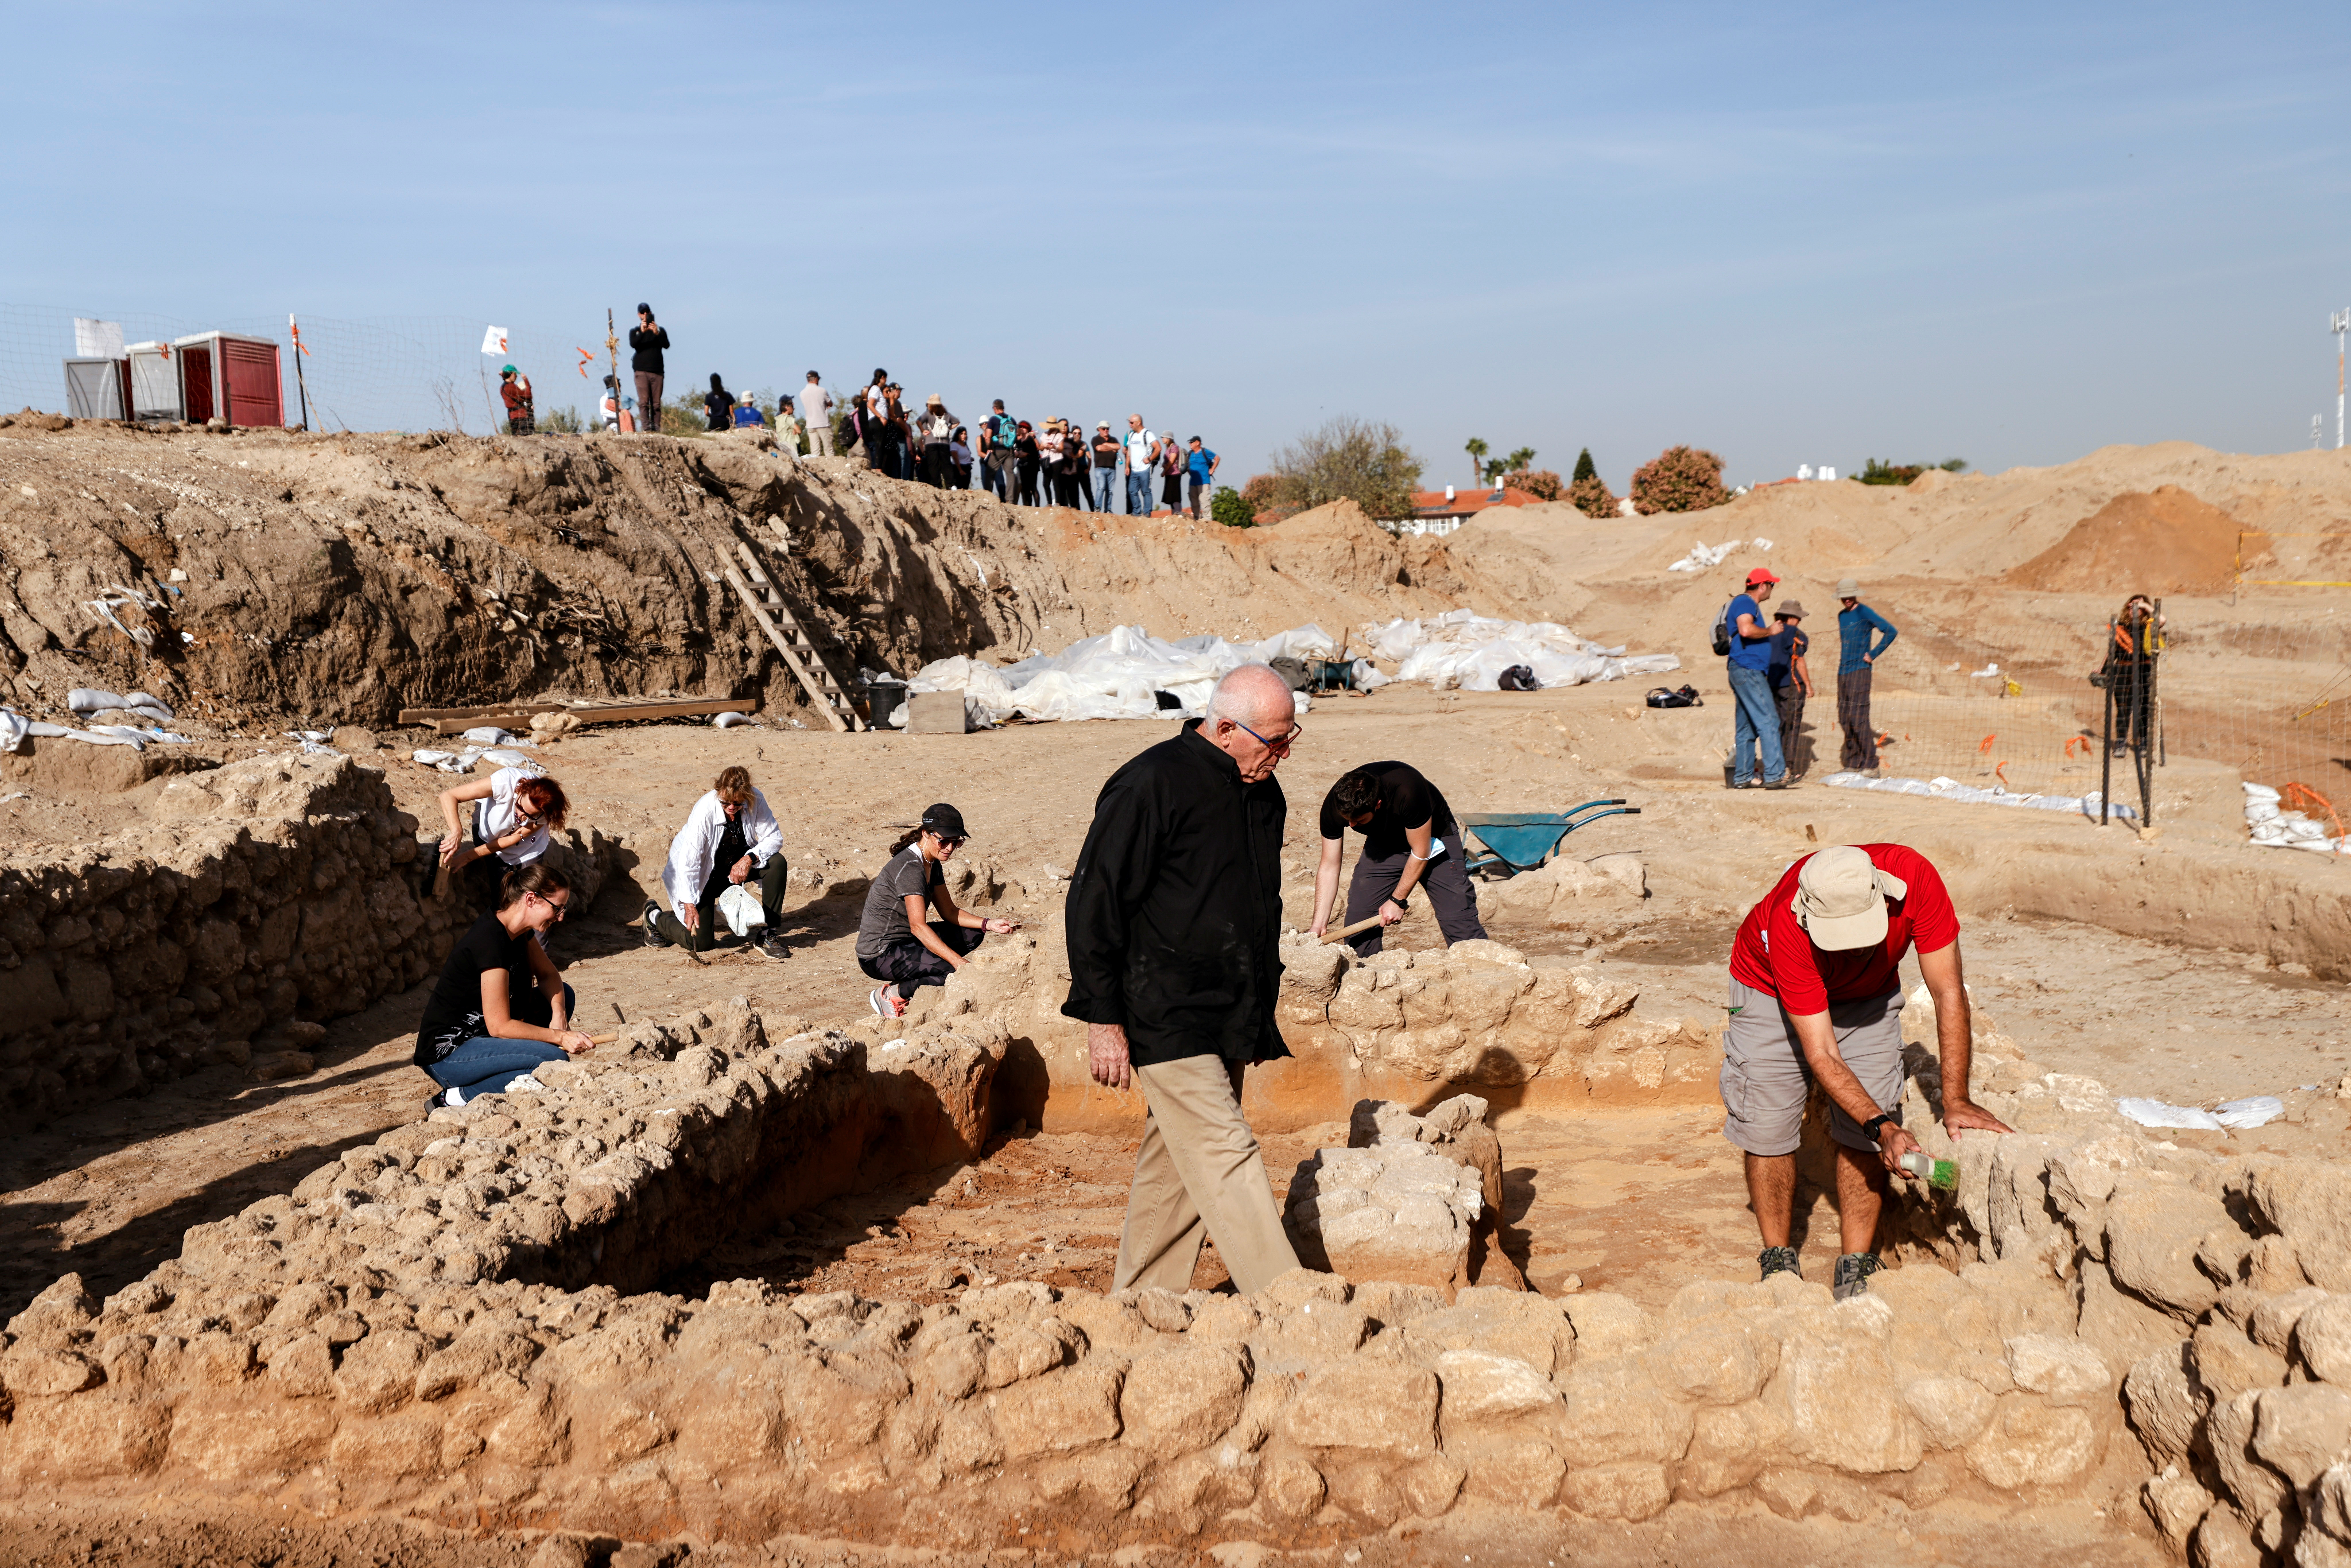 People work at the site of an excavation believed to be from the time of the Sanhedrin, the late first and second centuries CE according to the Israel Antiquities Authority in Yavne, Israel November 29, 2021. REUTERS/Amir Cohen